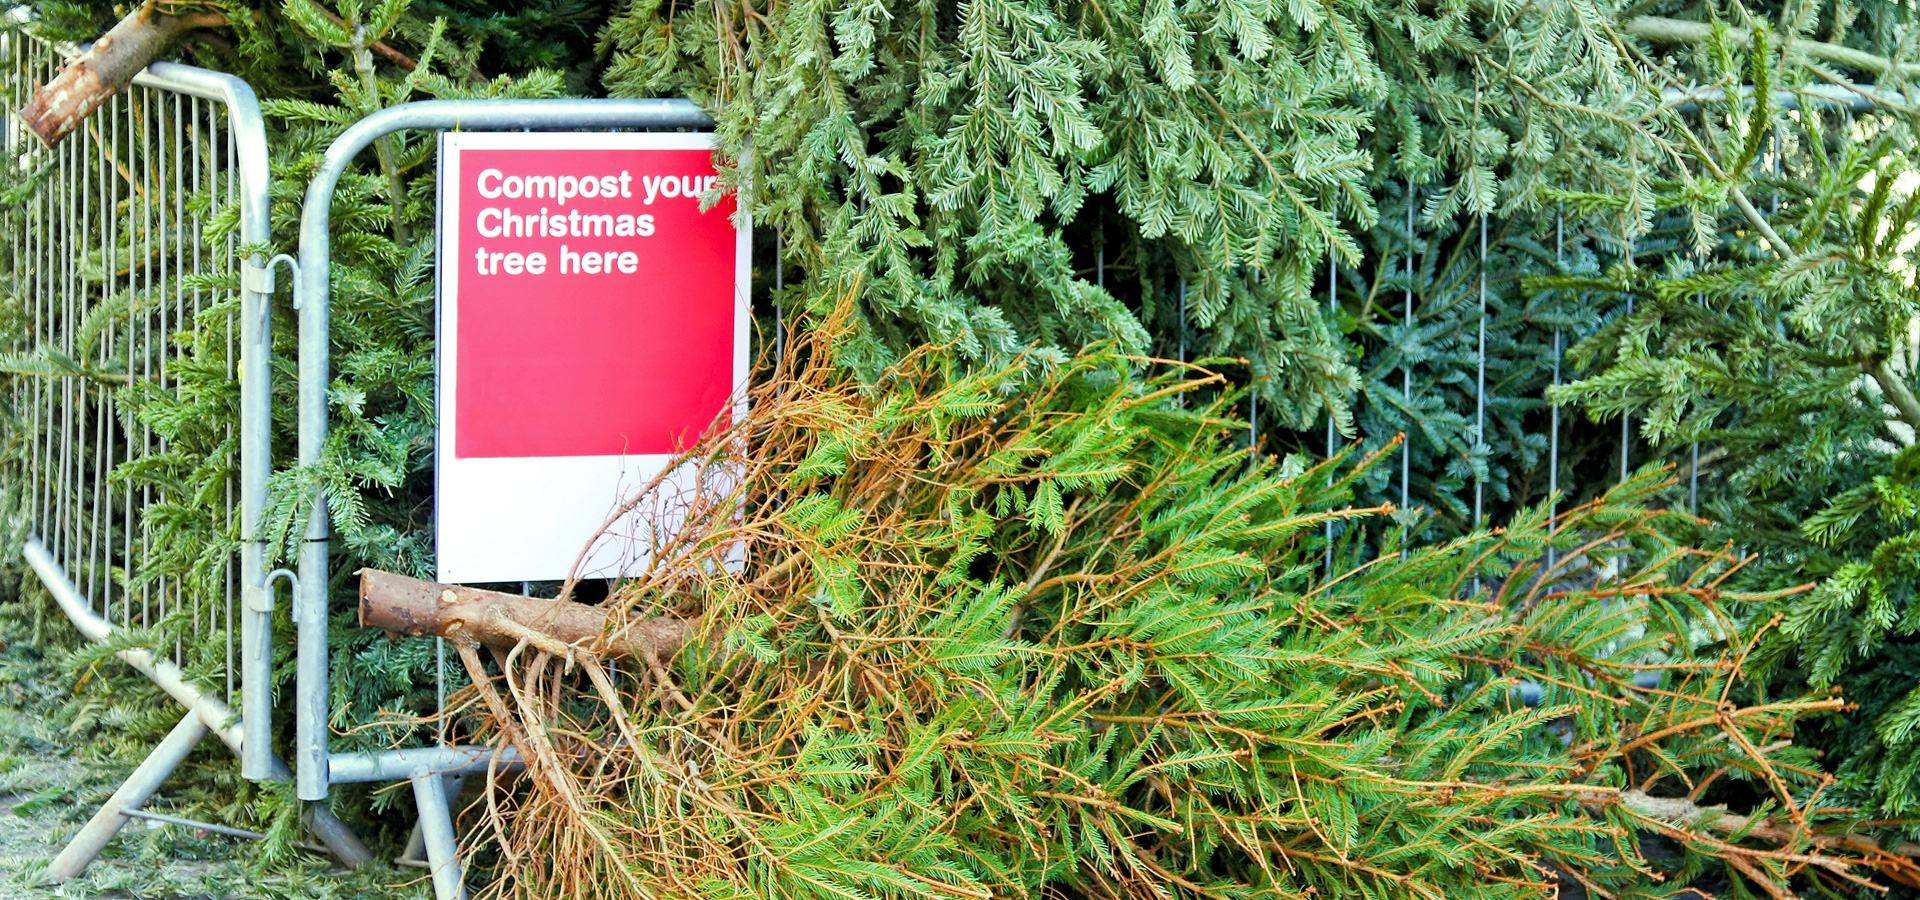 Christmas trees compost drop off location